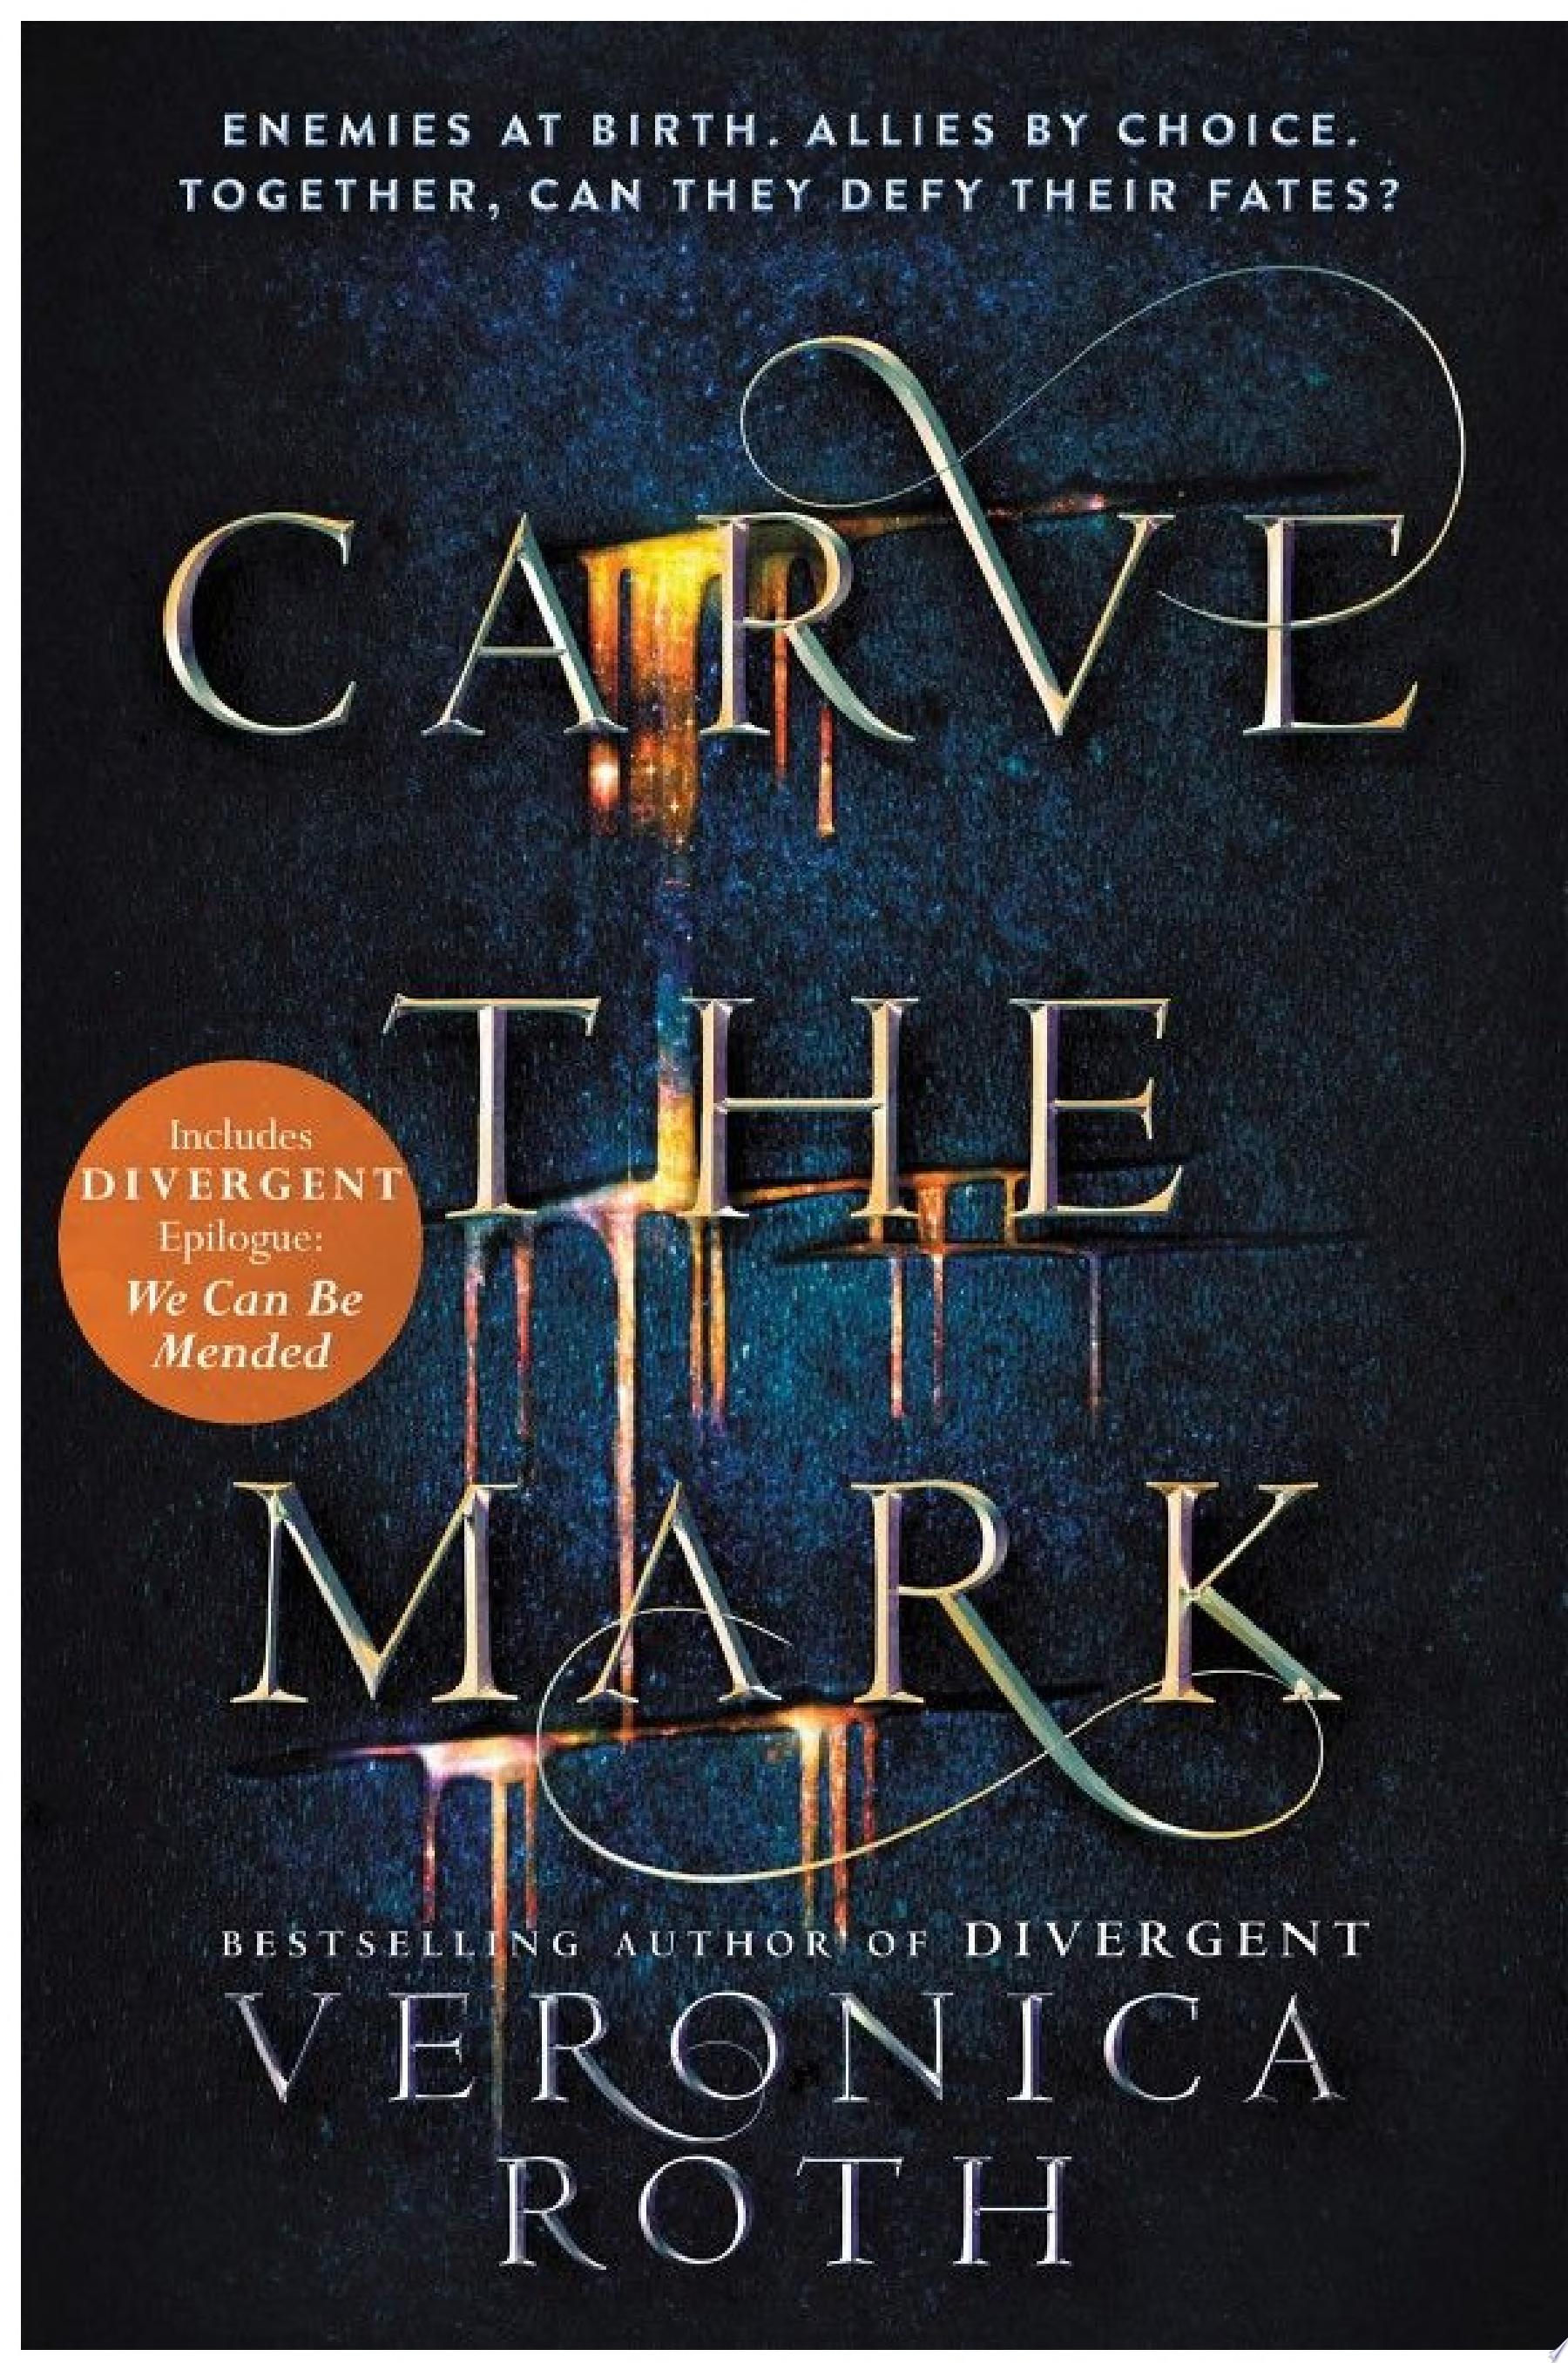 Image for "Carve the Mark"